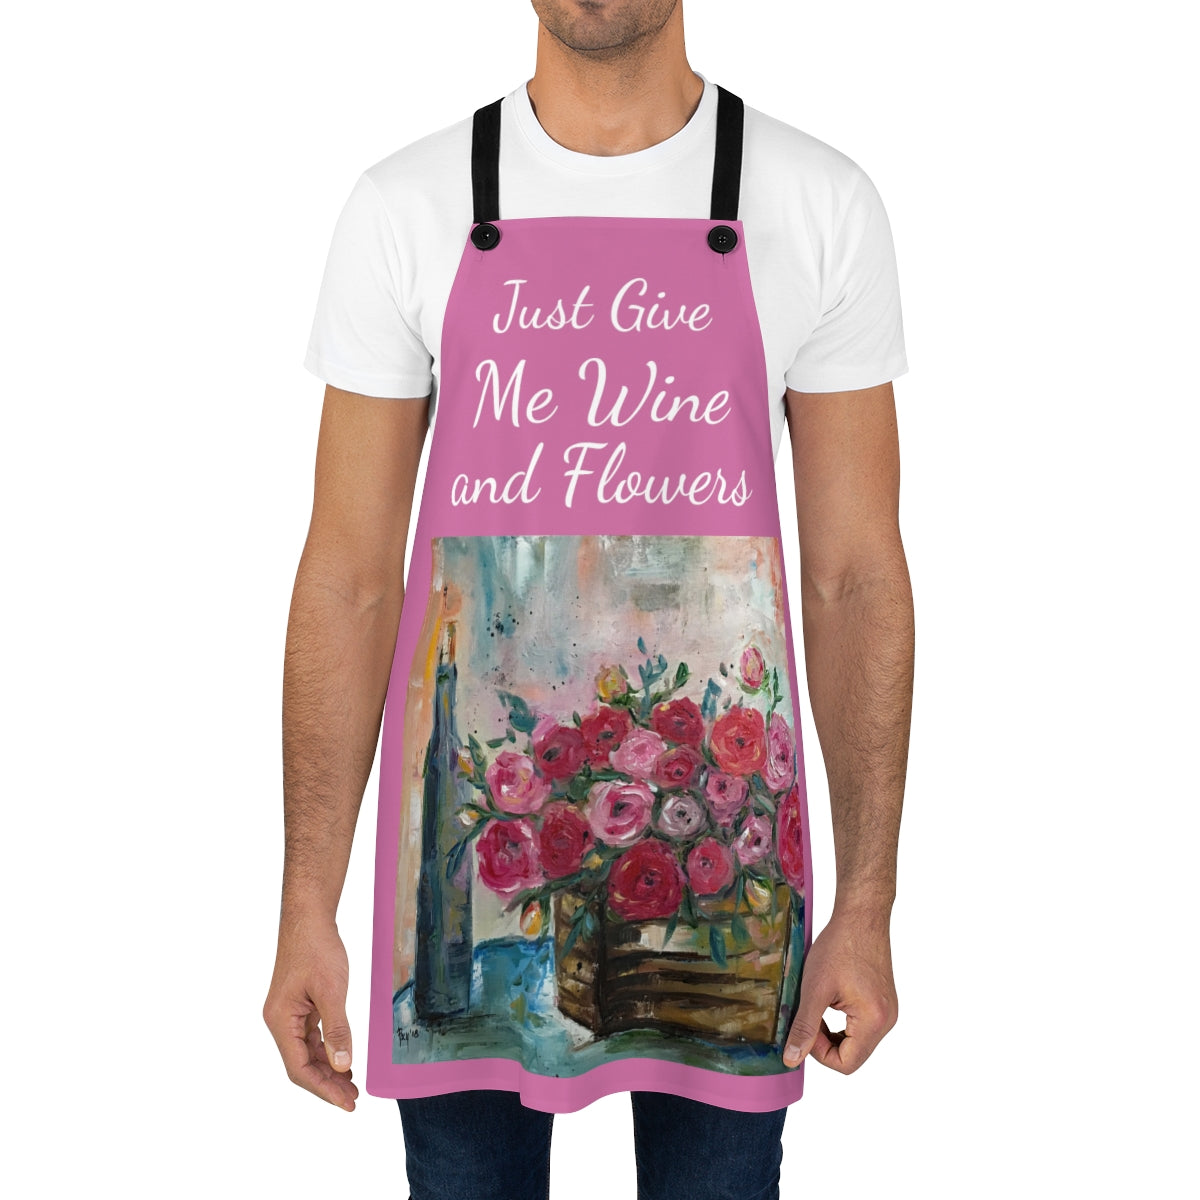 Just Give Me Wine and Flowers on a Pink Kitchen Apron